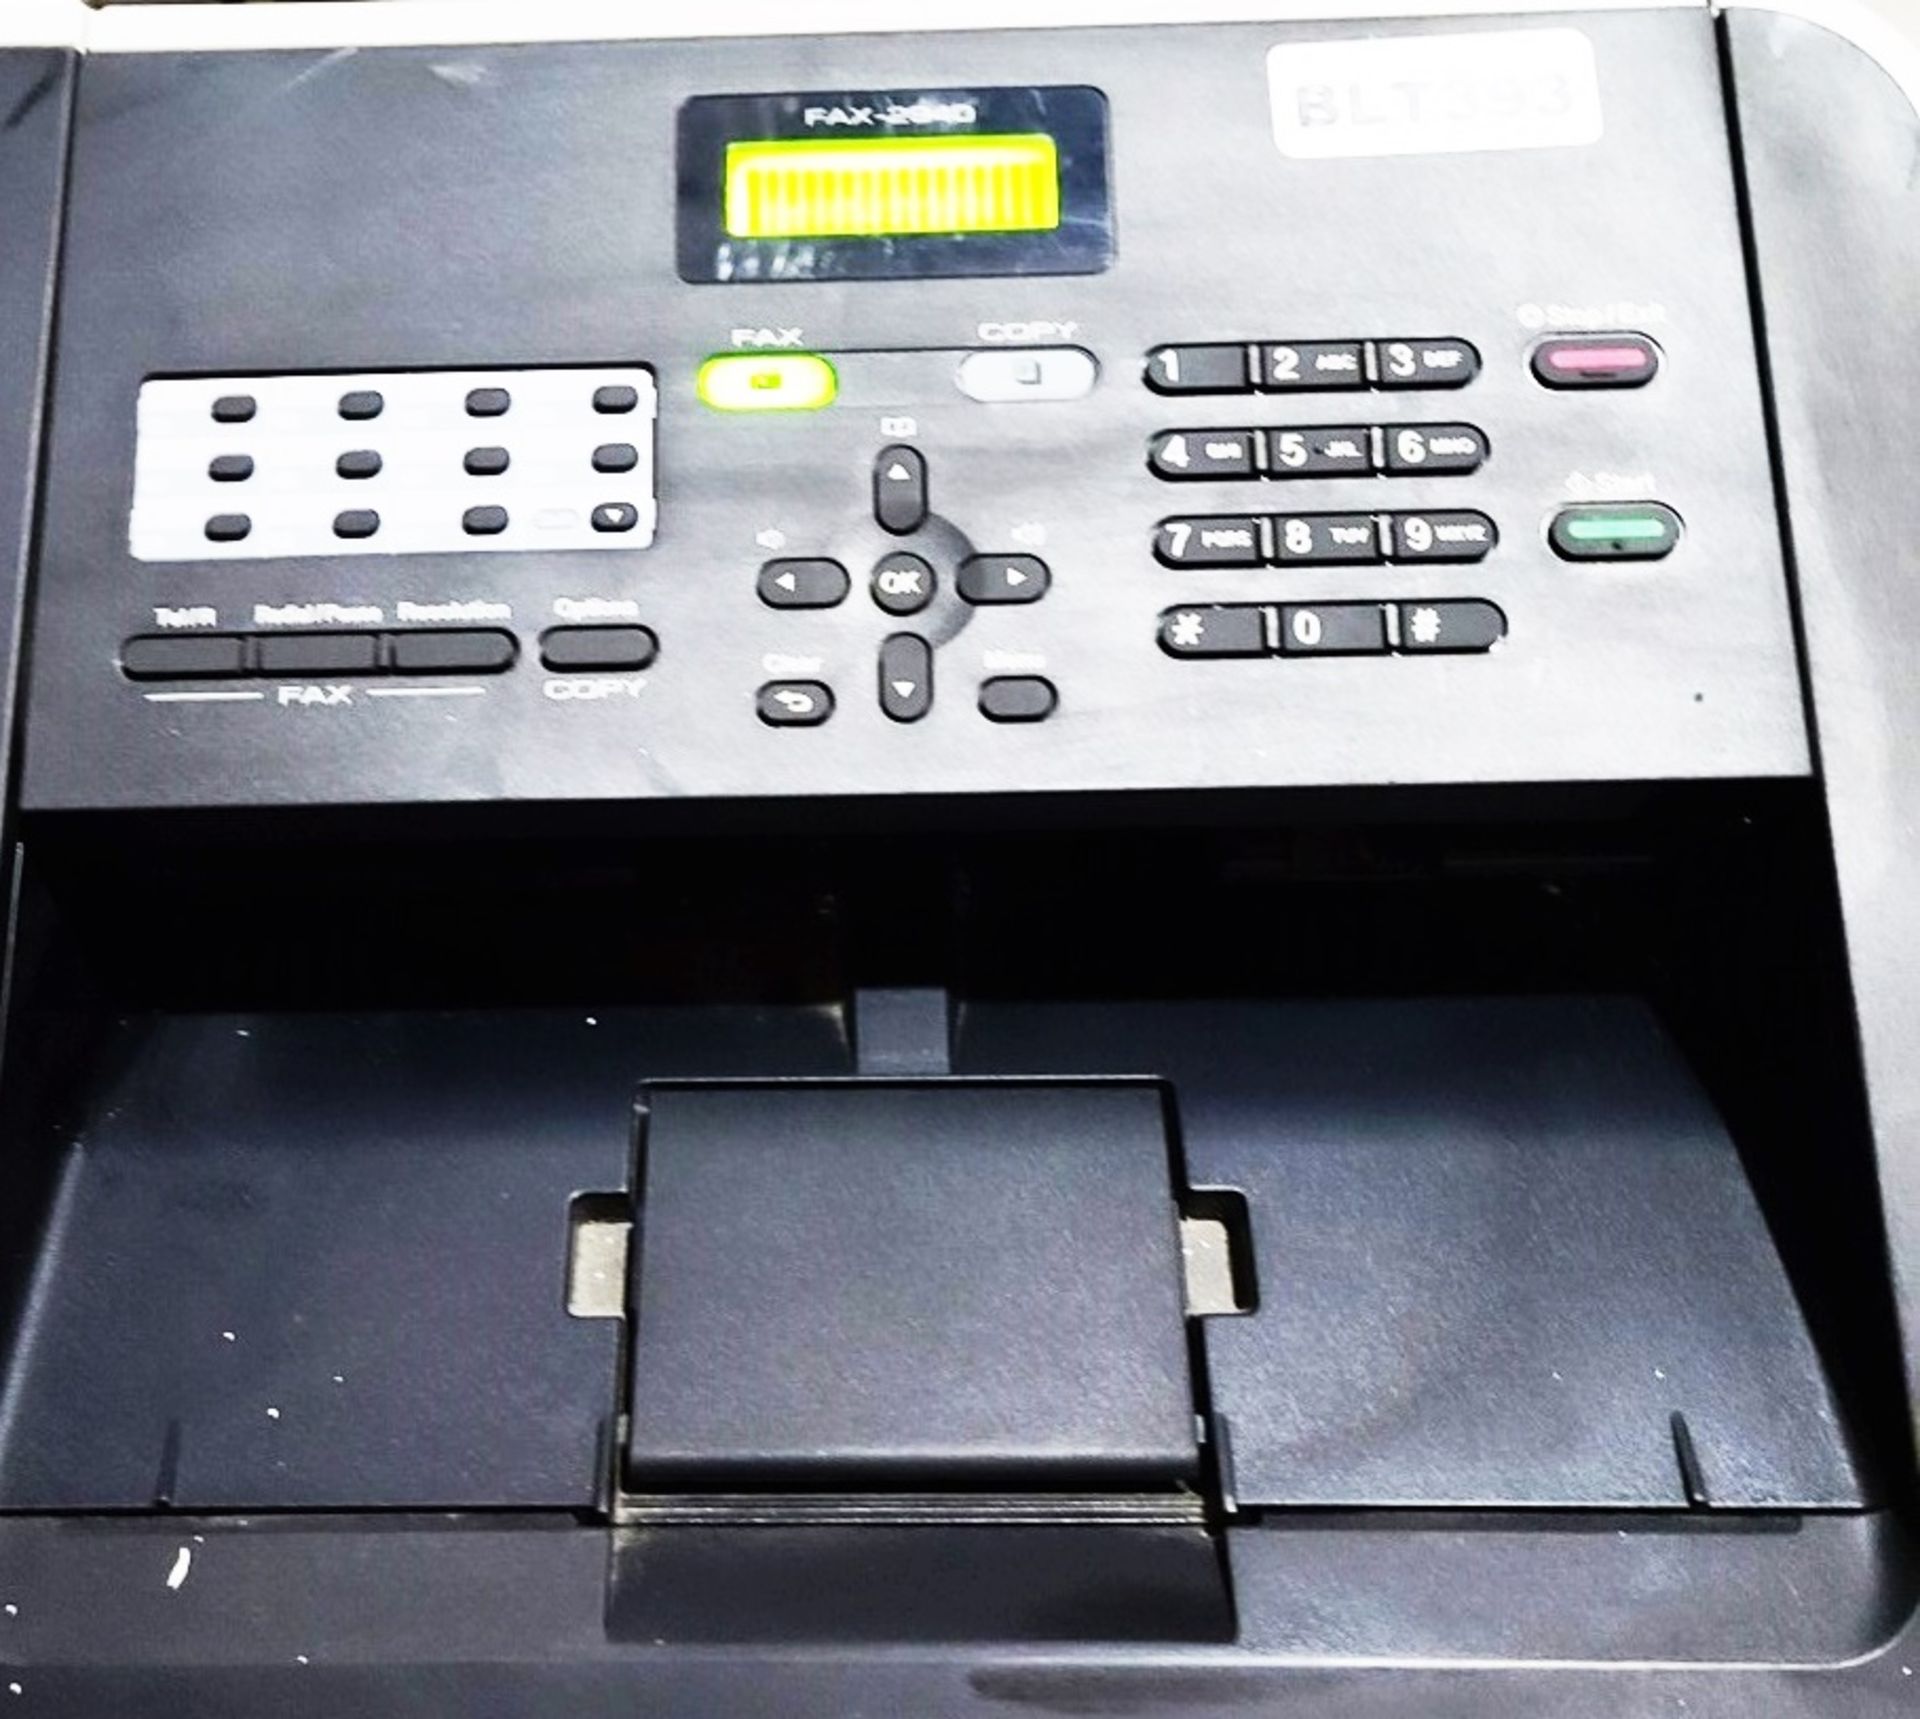 1 x Brother Printer MFC -9140CDN A4 Colour Multifunction Printer/Scanner/Copy/Fax Machine - Image 7 of 7